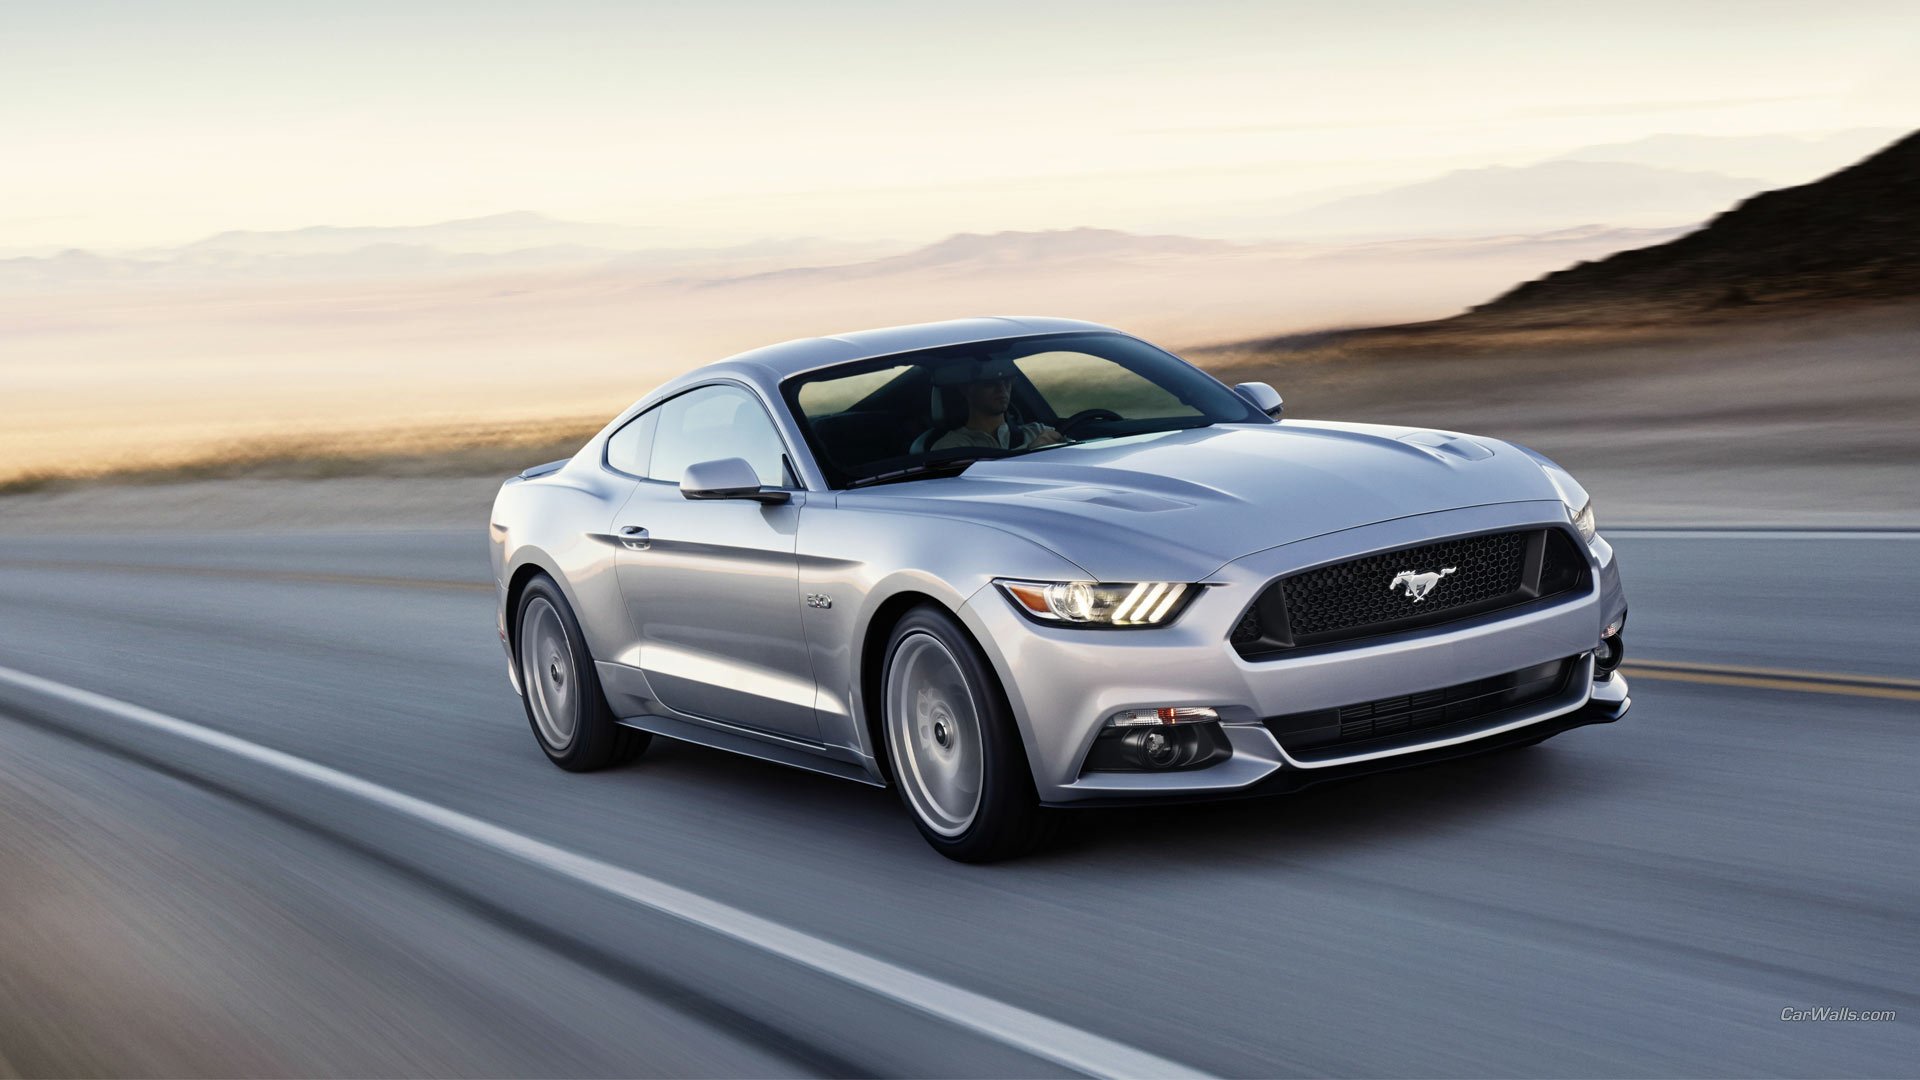 2015 Ford Mustang Gt Hd Wallpaper Background Image 1920x1080